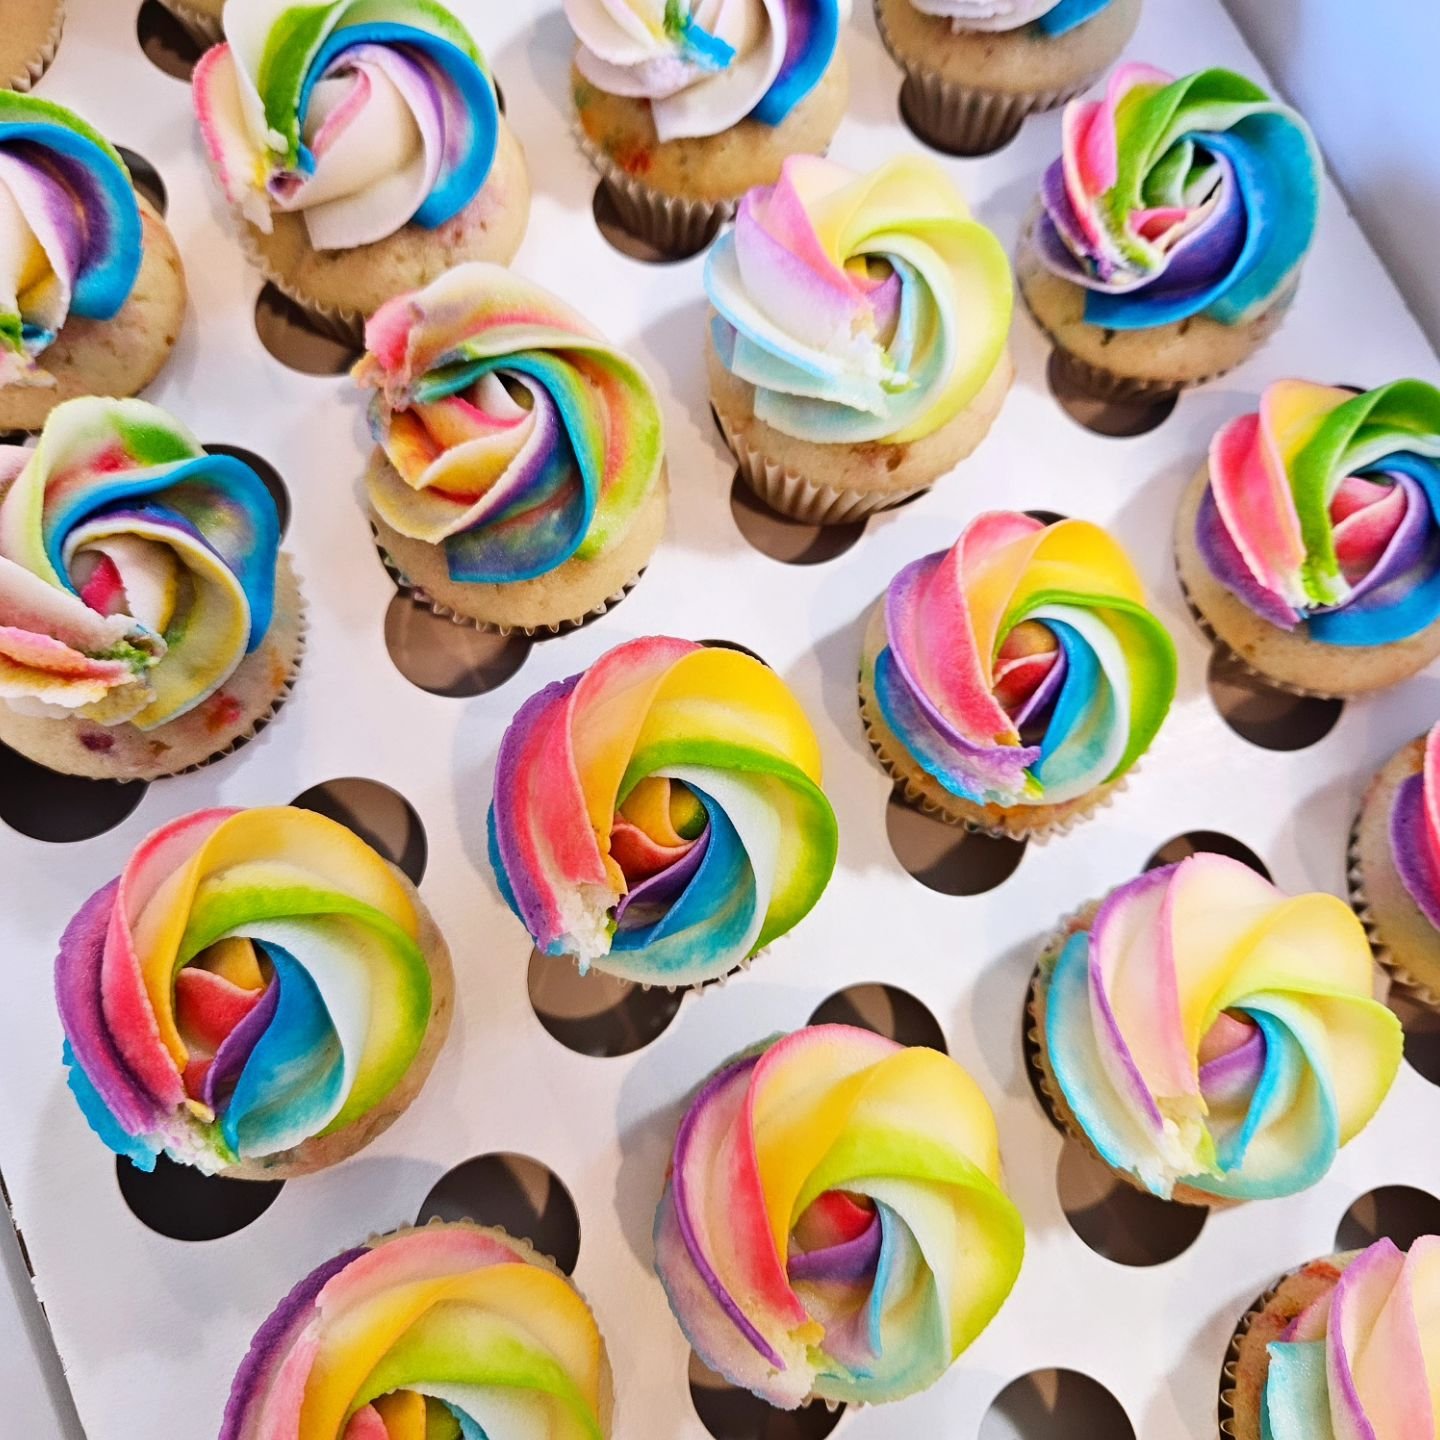 Rainbow cupcakes 🧁 I just love them so much, you can't be sad with a rainbow cupcake in your hand 🌈
.
.
.
#confetti #rainbowcake #rainbowcupcakes #cupcakesofinstagram #cupcakes #cupcakedecorating #2024cake #cake #cakedecorating #cakesofinstagram #c